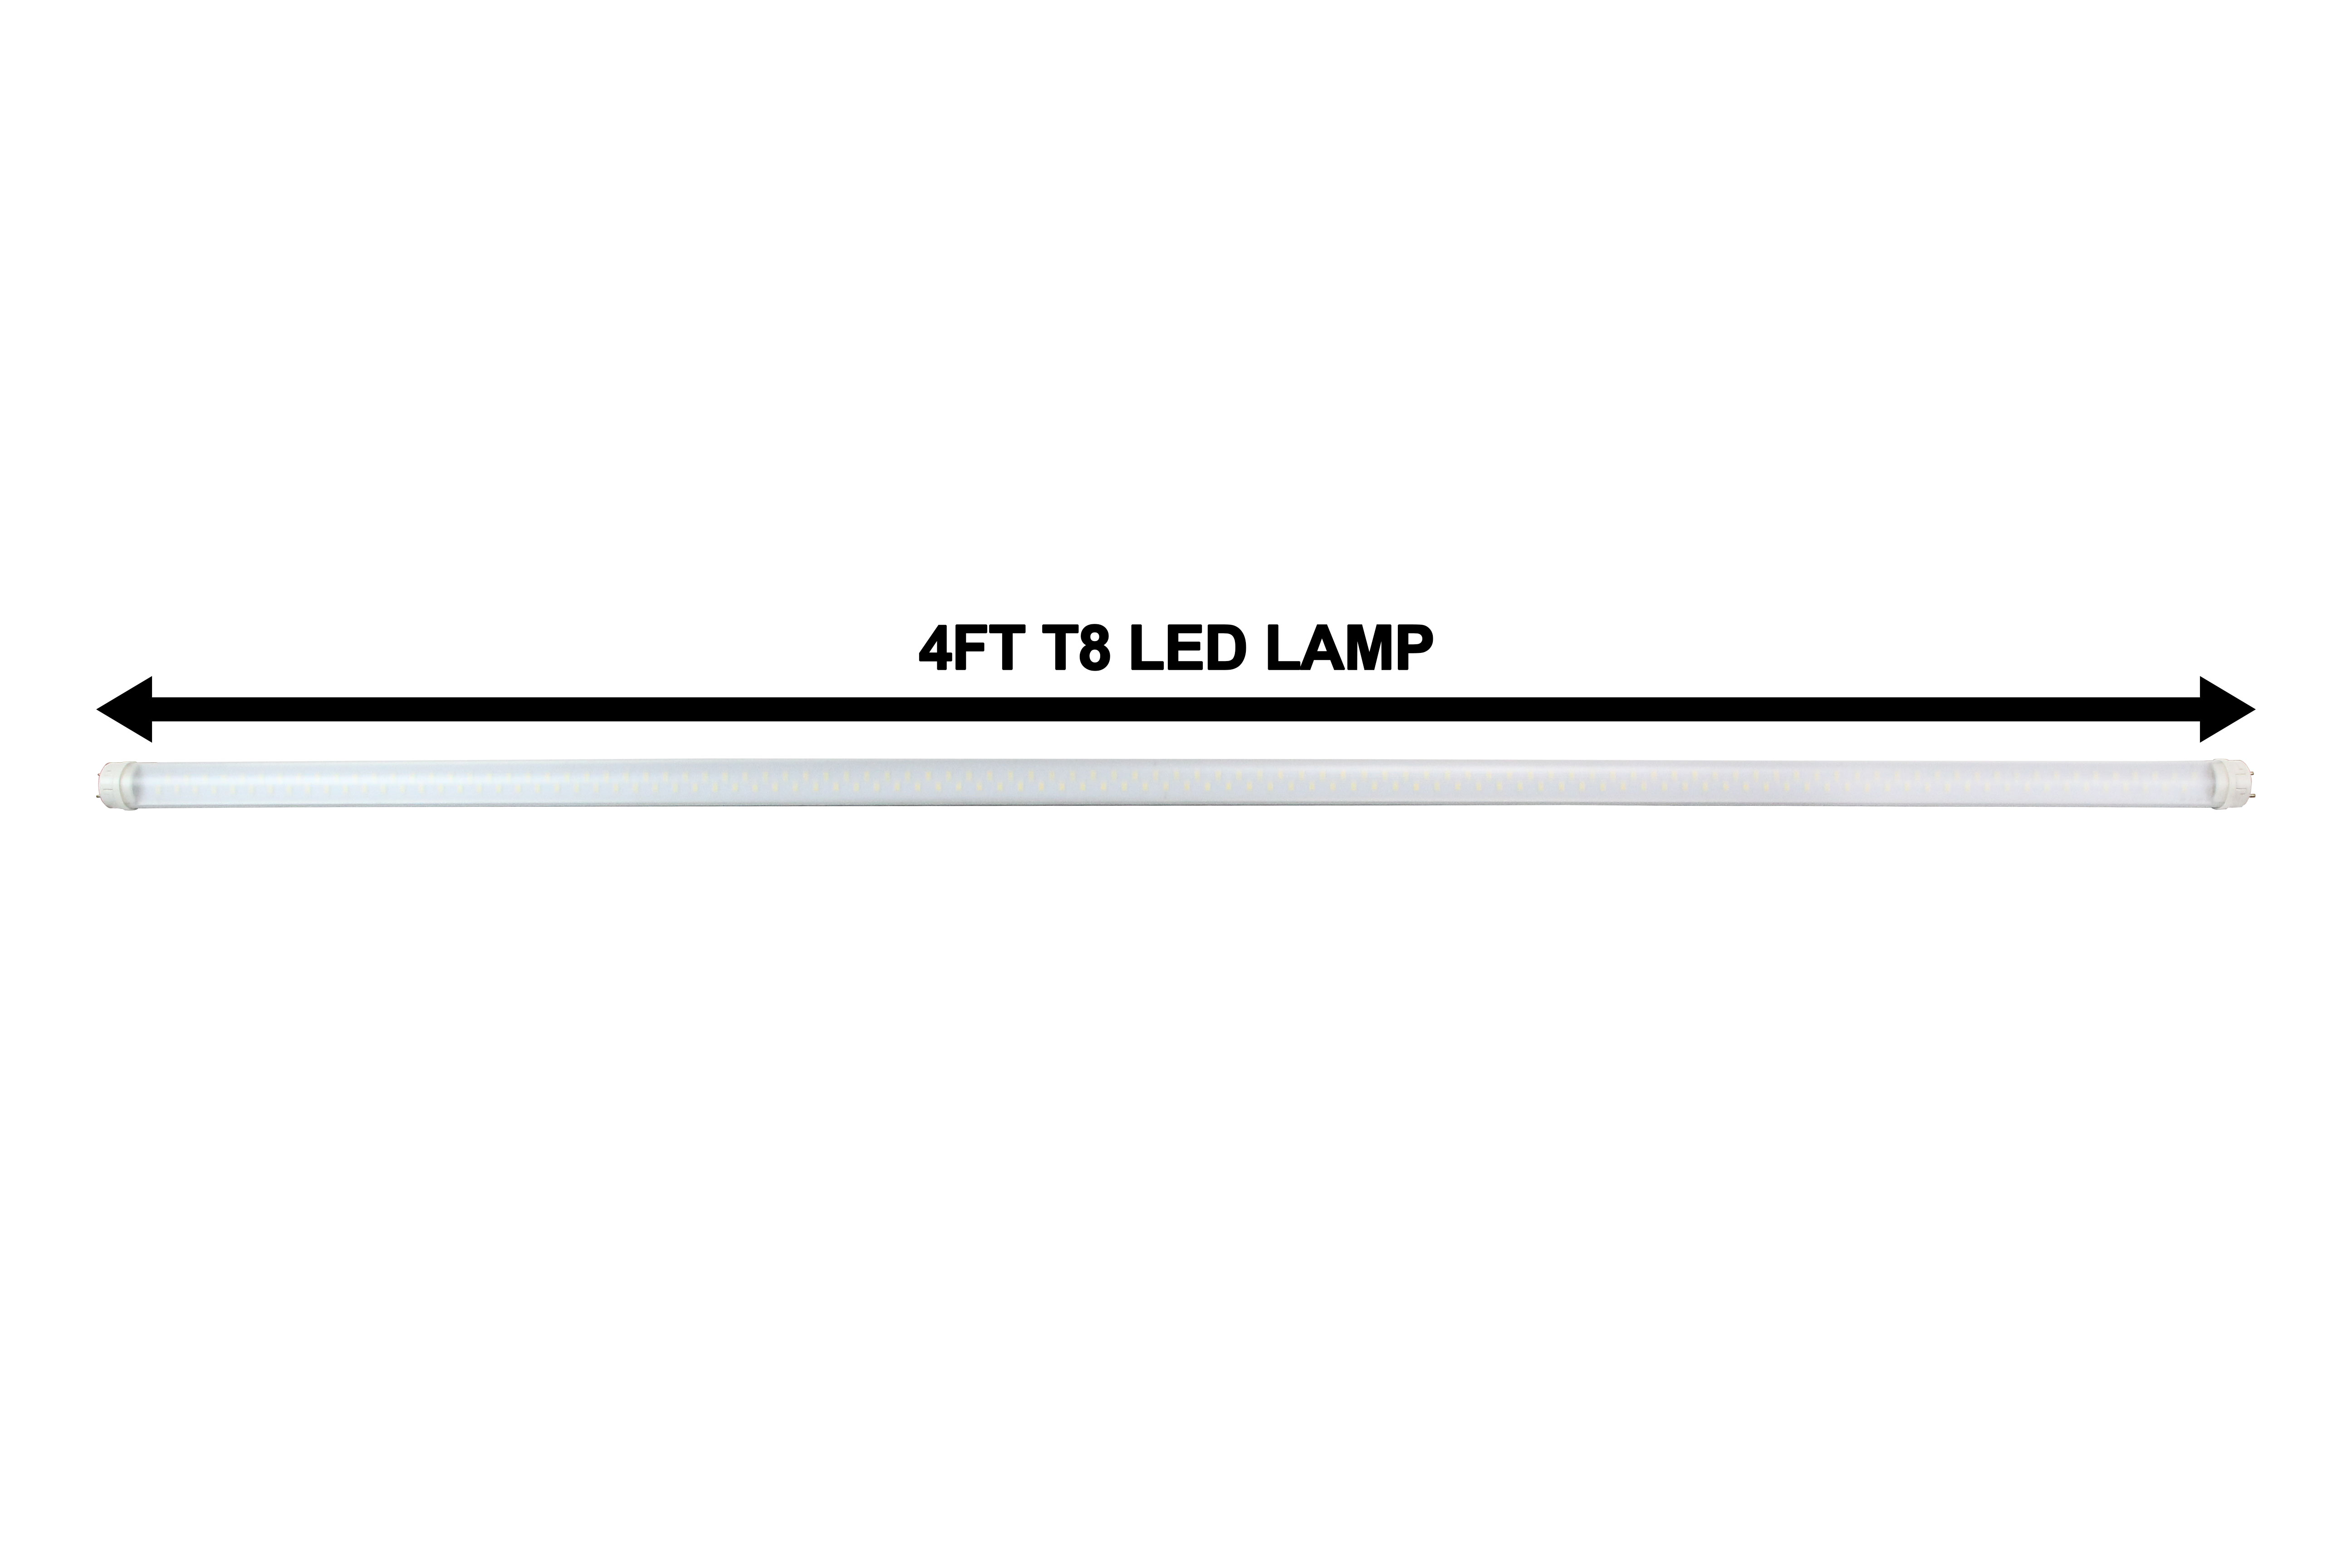 Four Foot T8 LED Lamp that produces 2,000 lumens of light